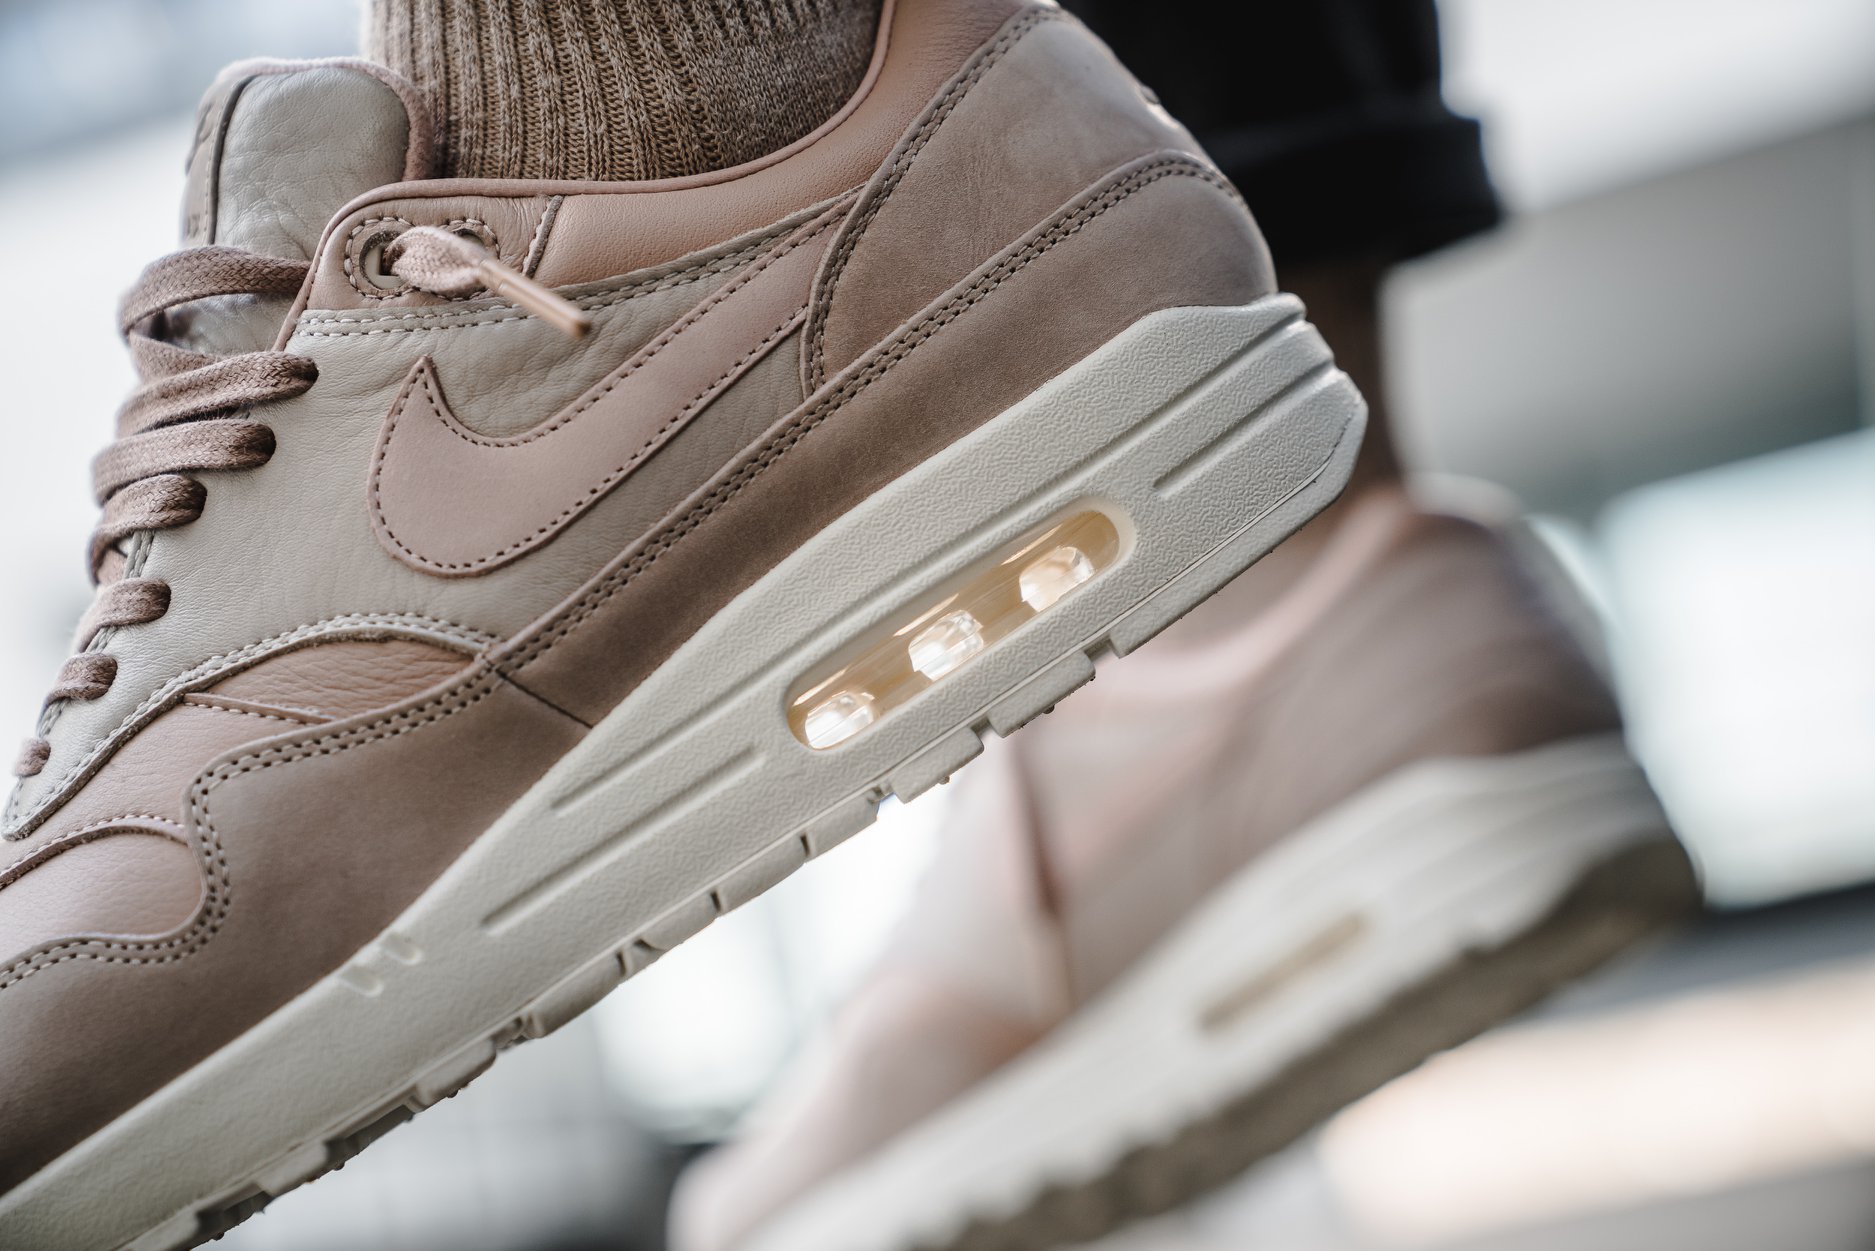 SHELFLIFE.CO.ZA on Twitter: "🚨COMING SOON🚨 Nike Air Max 1 Sand drops on Tuesday the 20th of February our CPT, JHB and online store Read more here: / Twitter